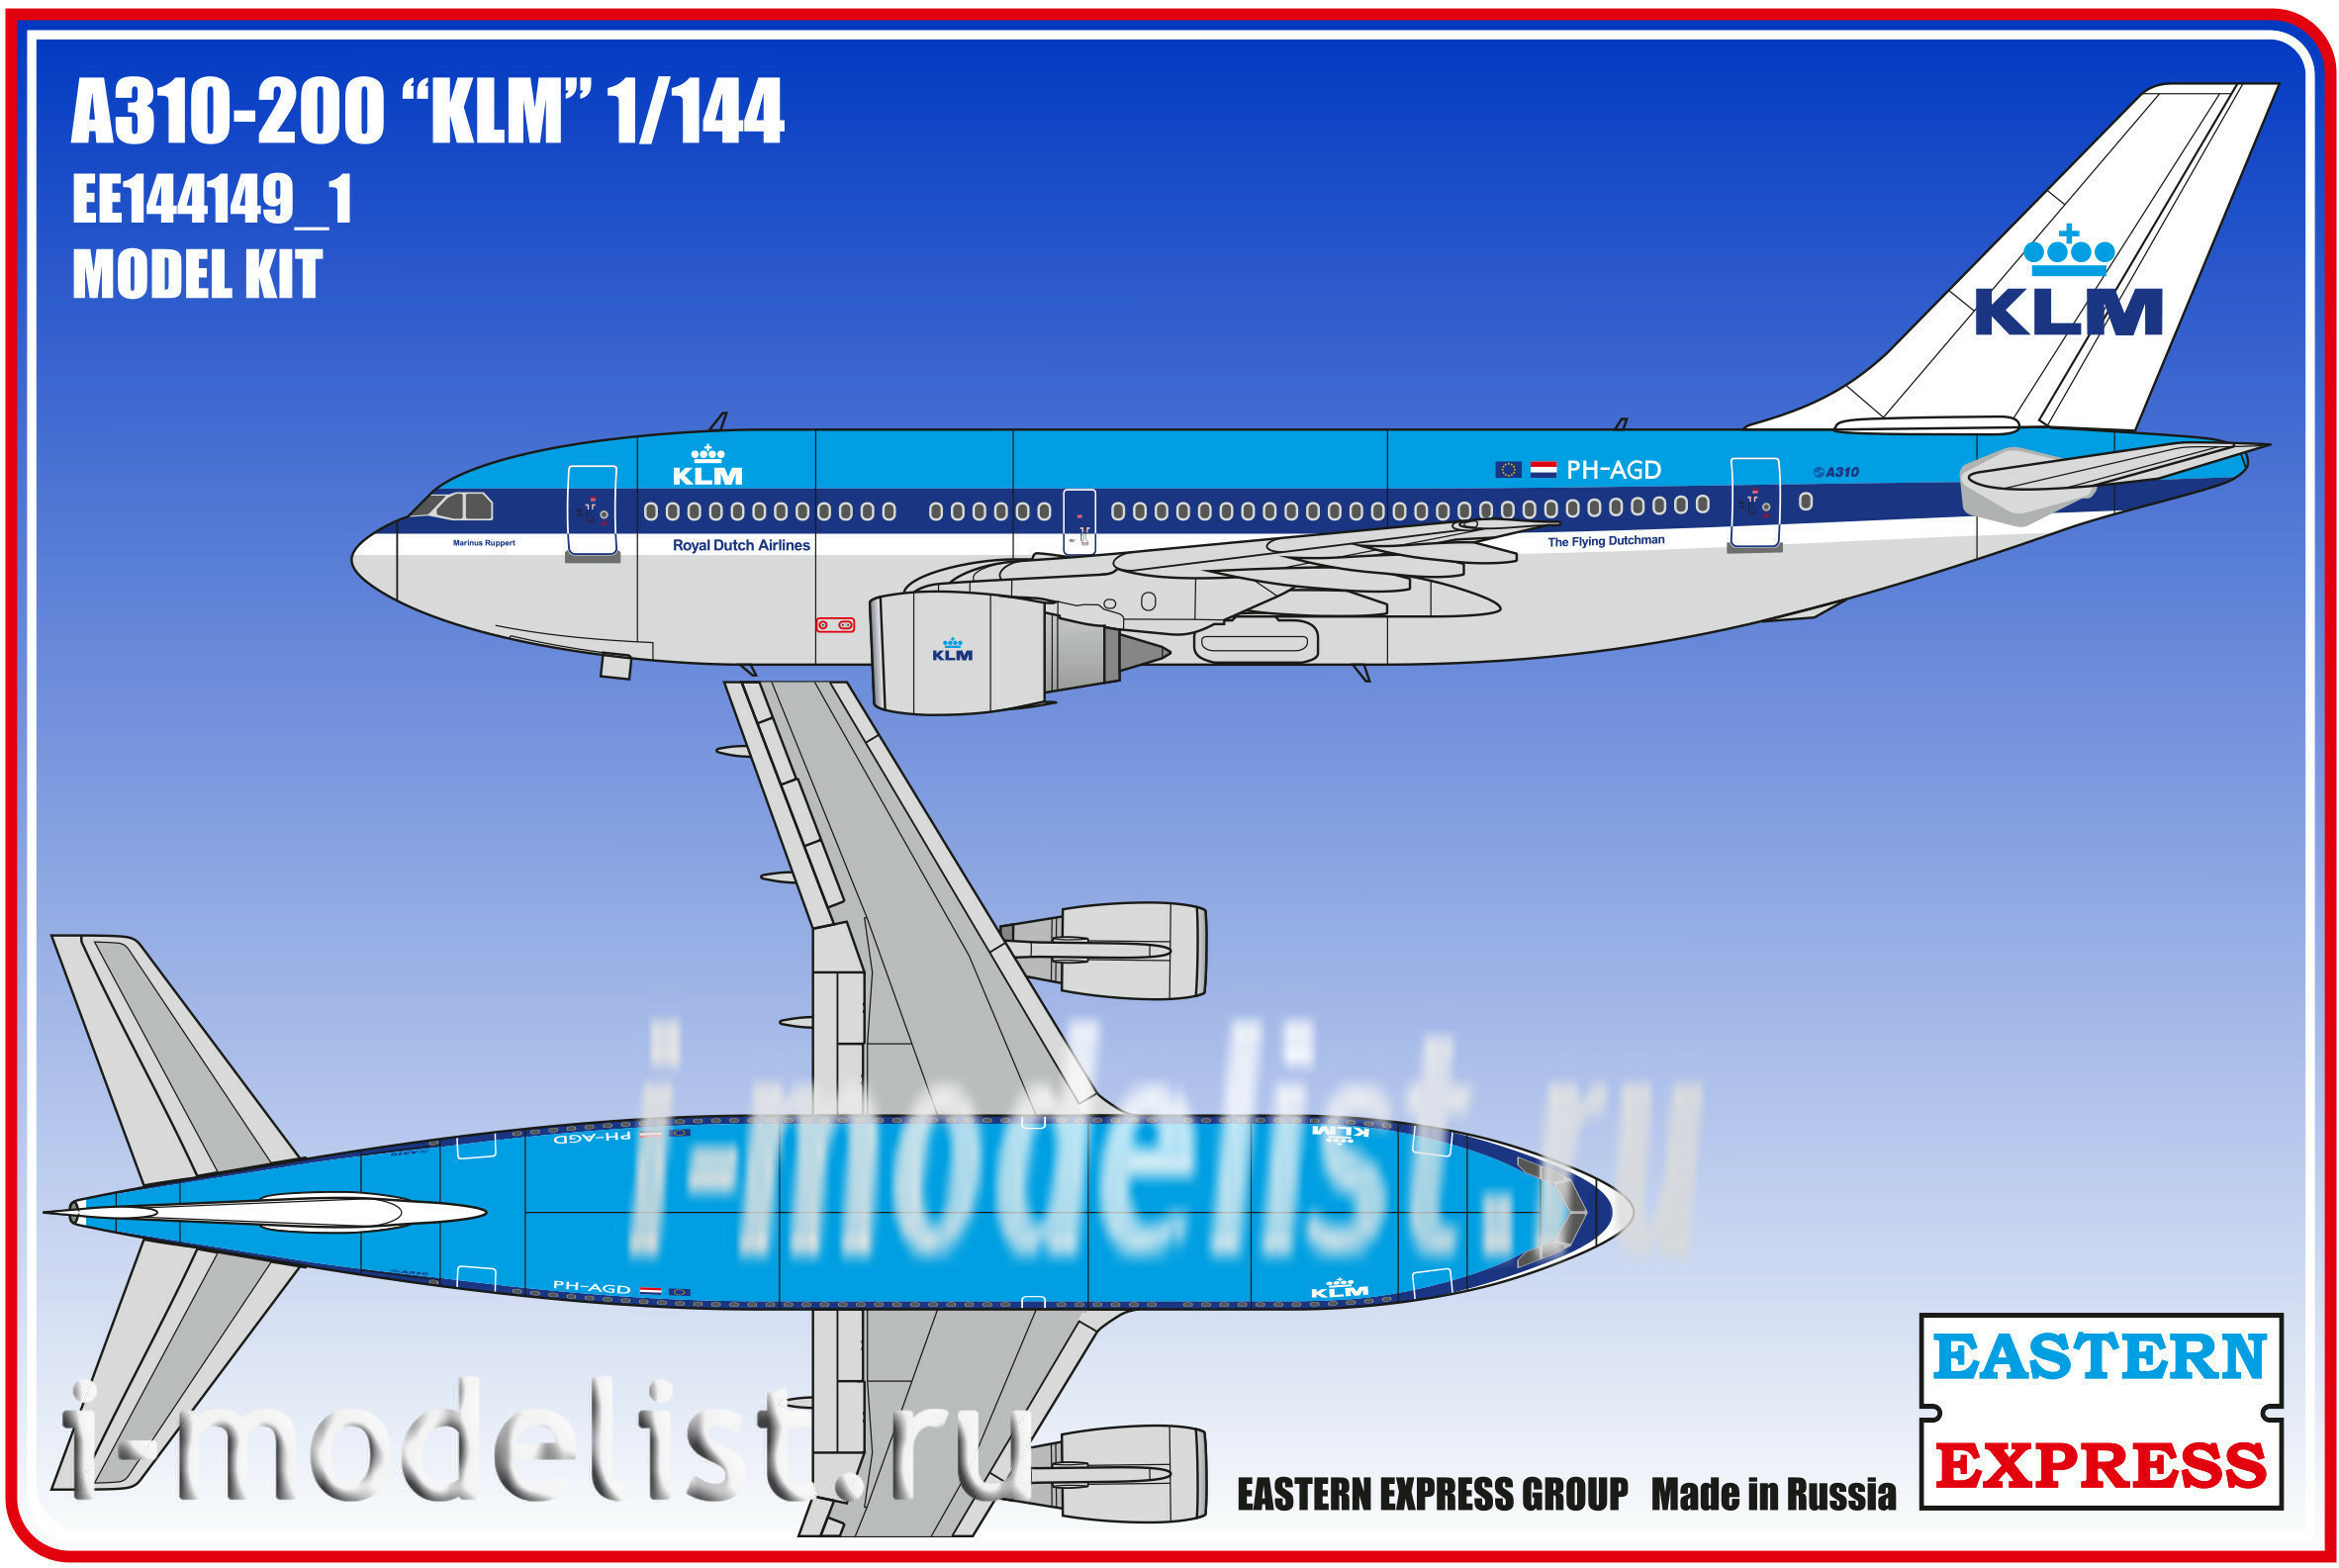 144149-1 Orient Express 1/144 KLM A310-200 Airliner